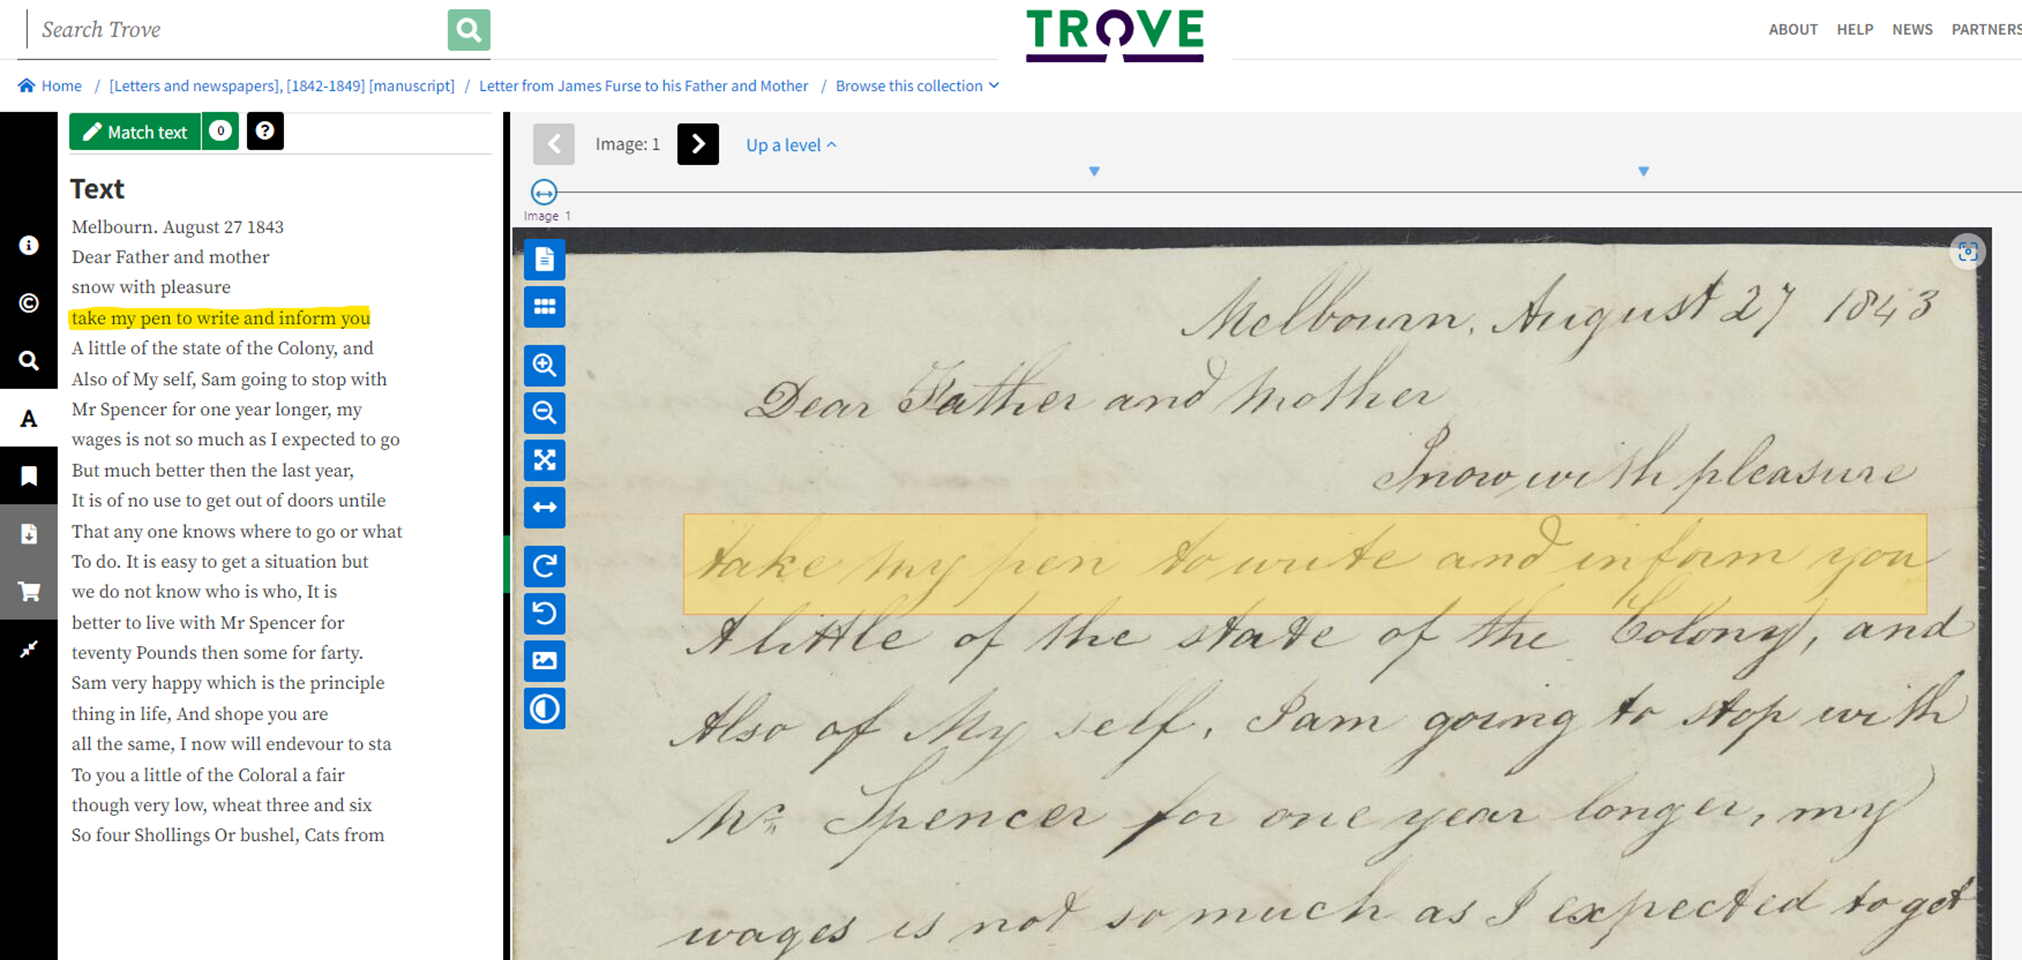 Screen-capture of Trove website. A handwritten letter can be seen on the right side of the screen and on the left is a computerised transcript of the letter's text